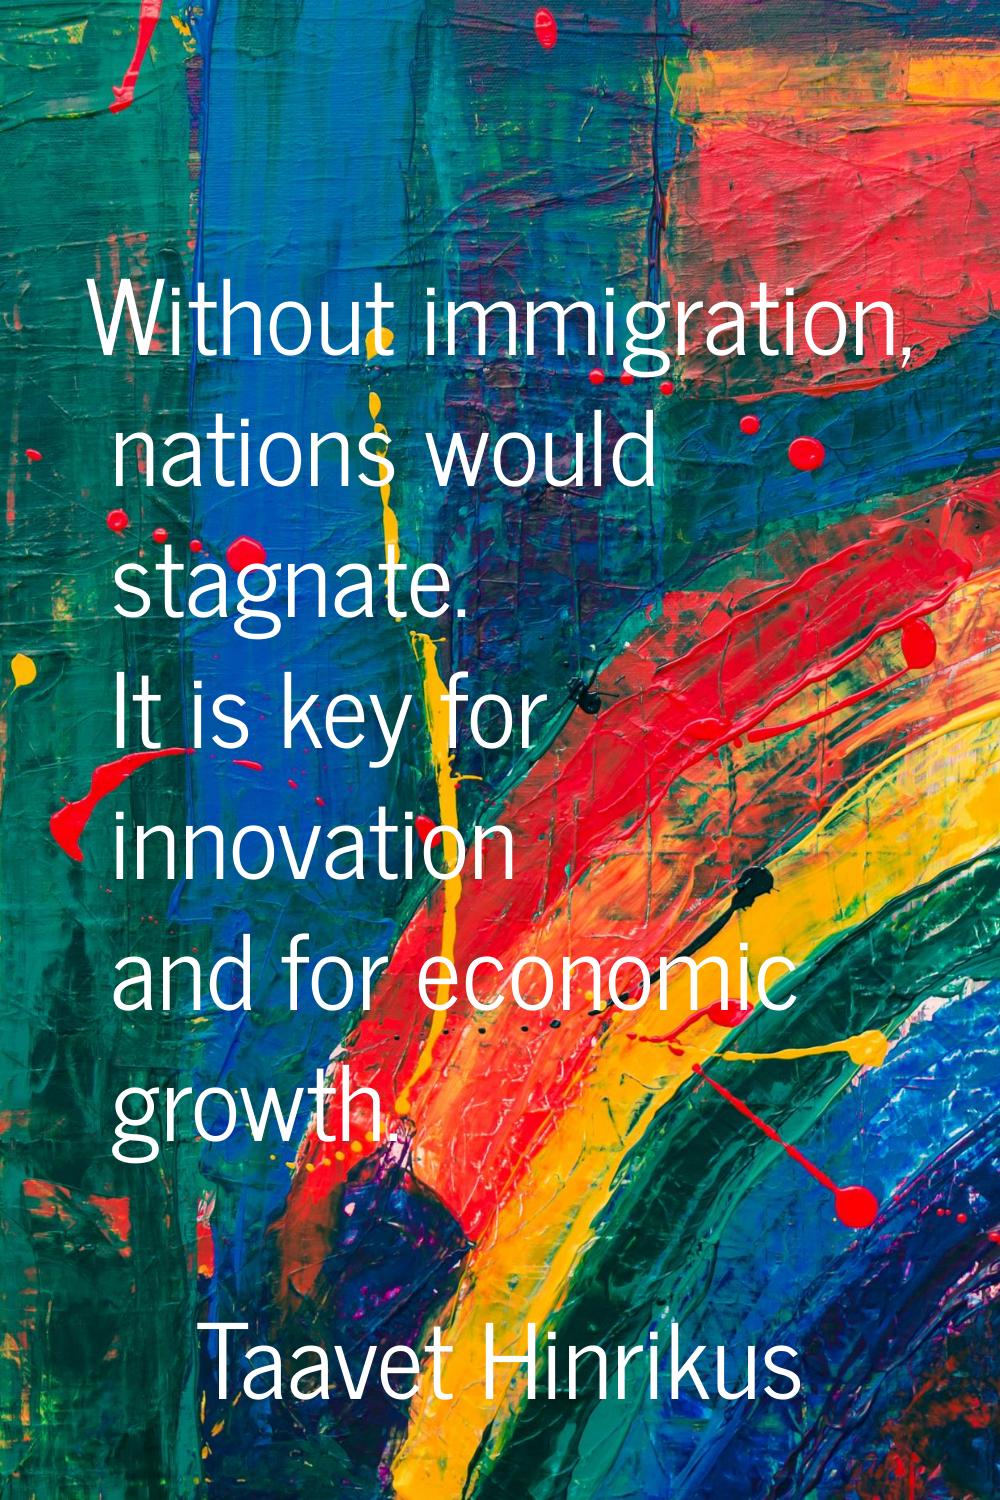 Without immigration, nations would stagnate. It is key for innovation and for economic growth.